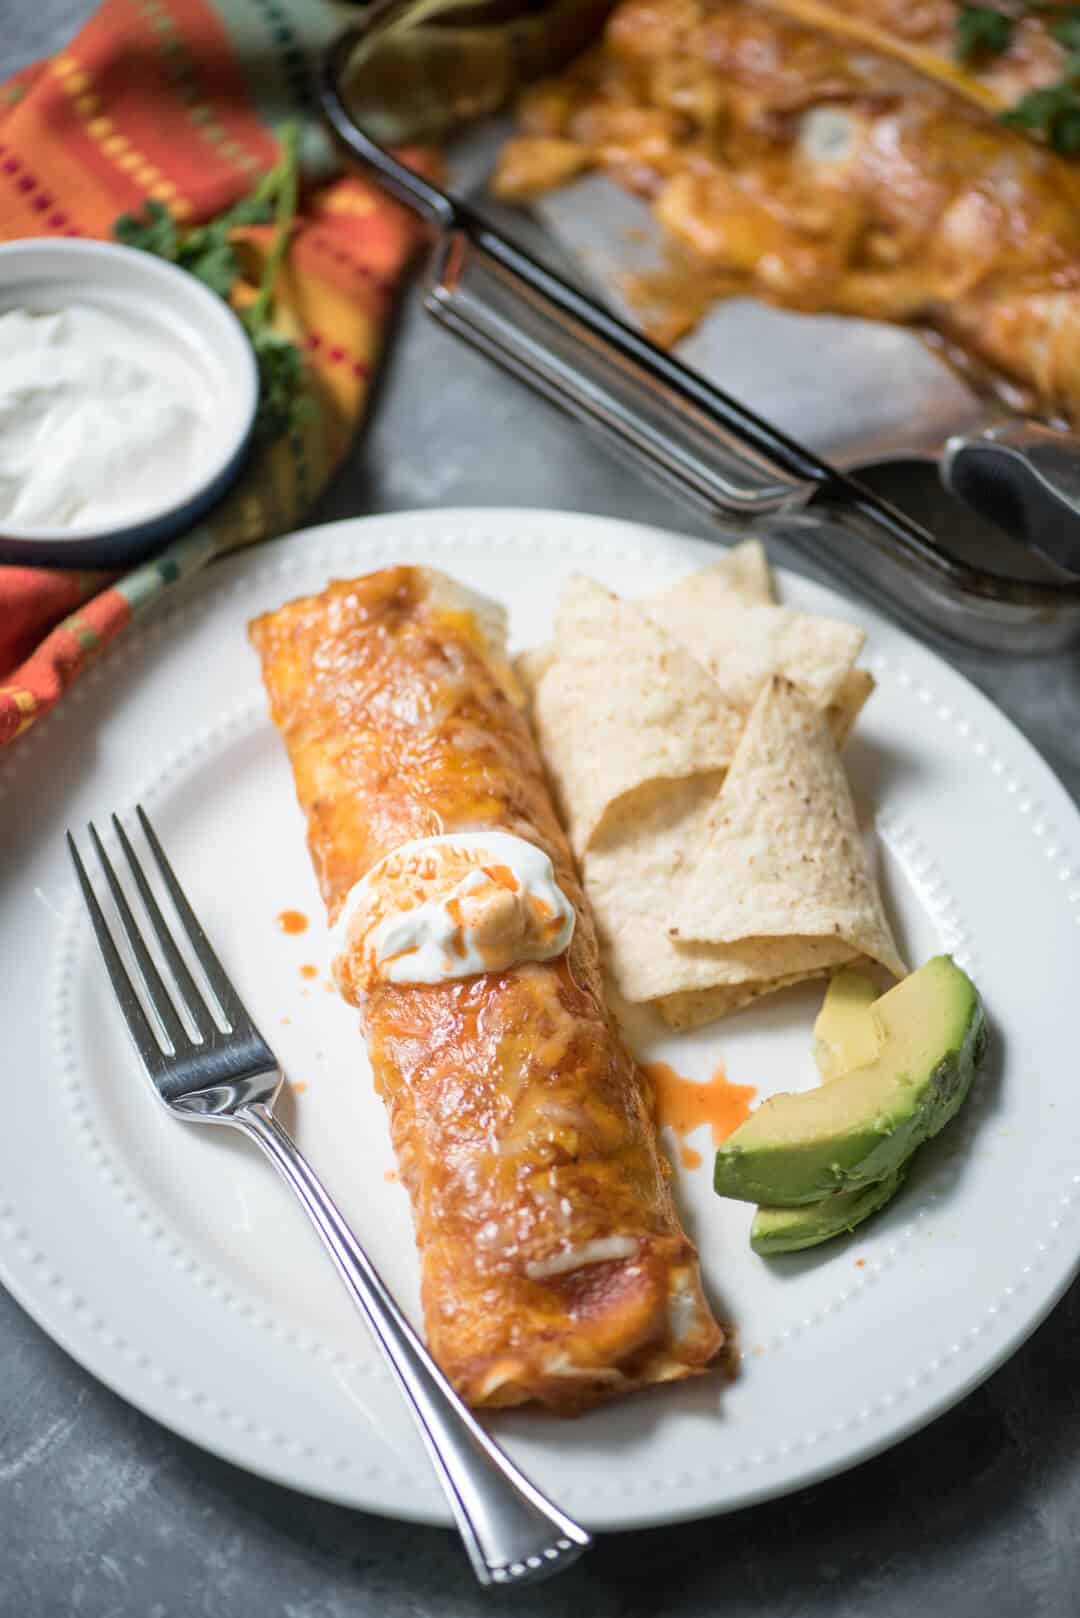 An enchilada topped with sour cream on a white plate with slices of avocado and tortilla chips.